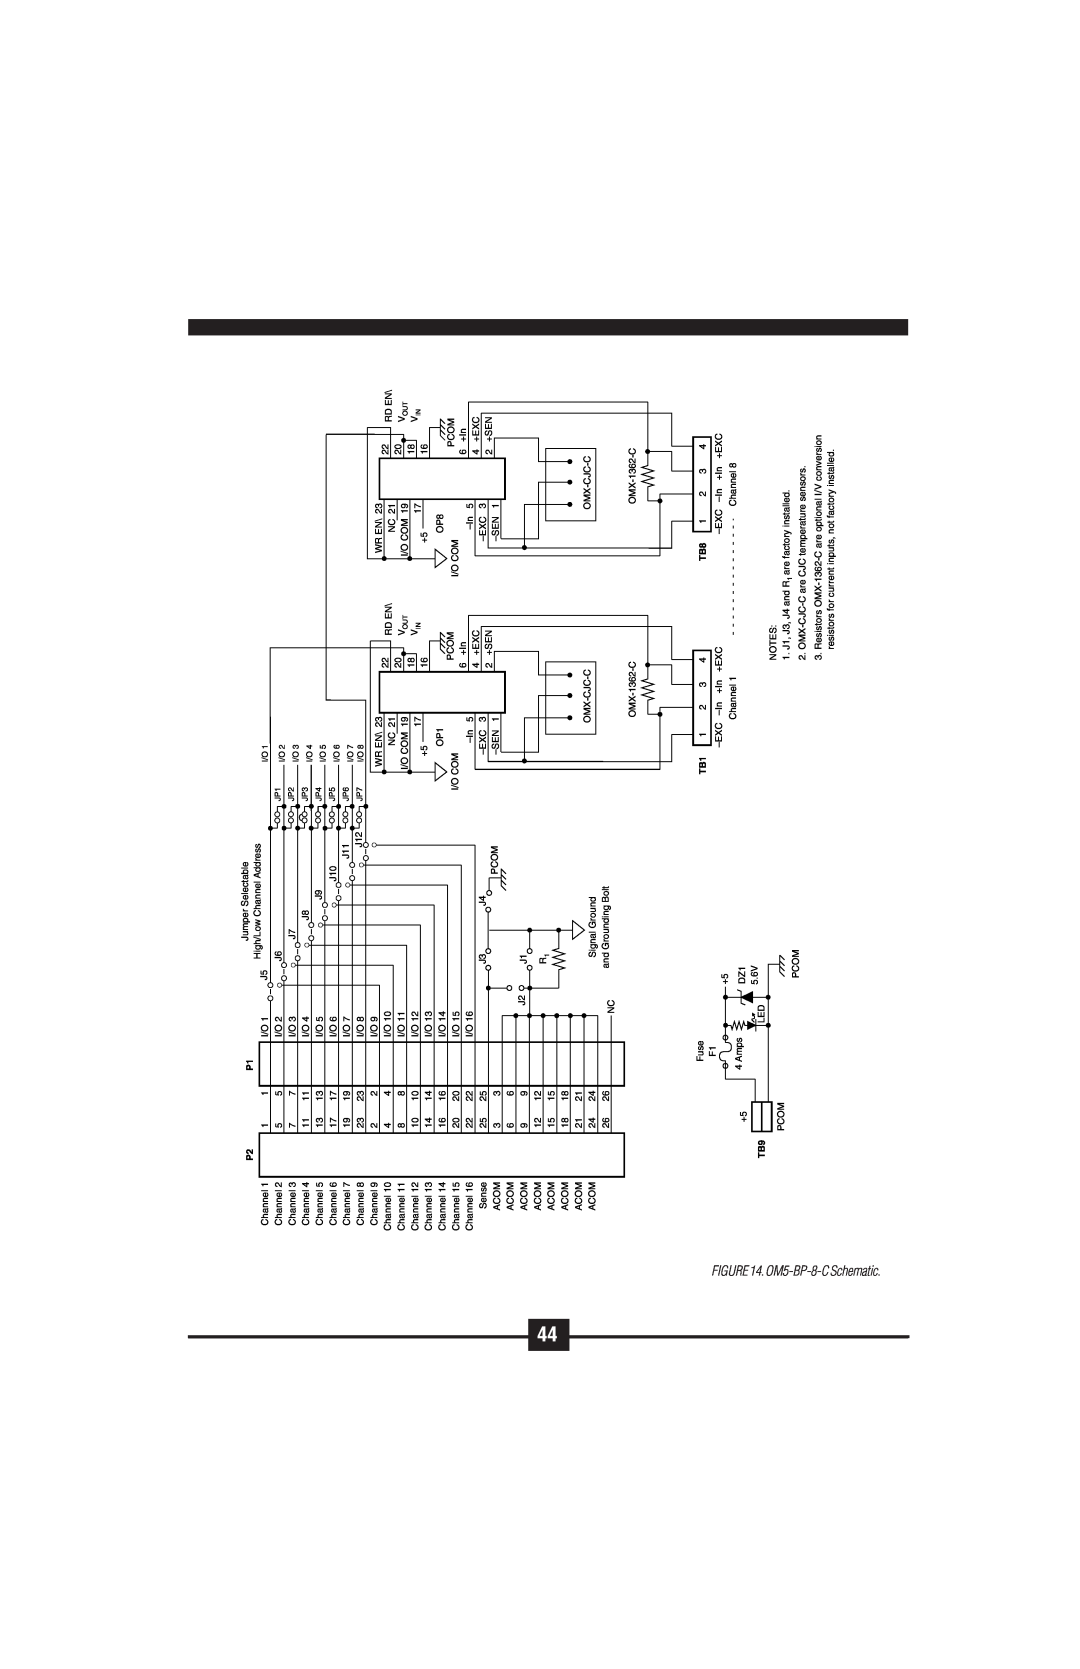 Omega Vehicle Security OM5-C manual BP-8-CSchematic 